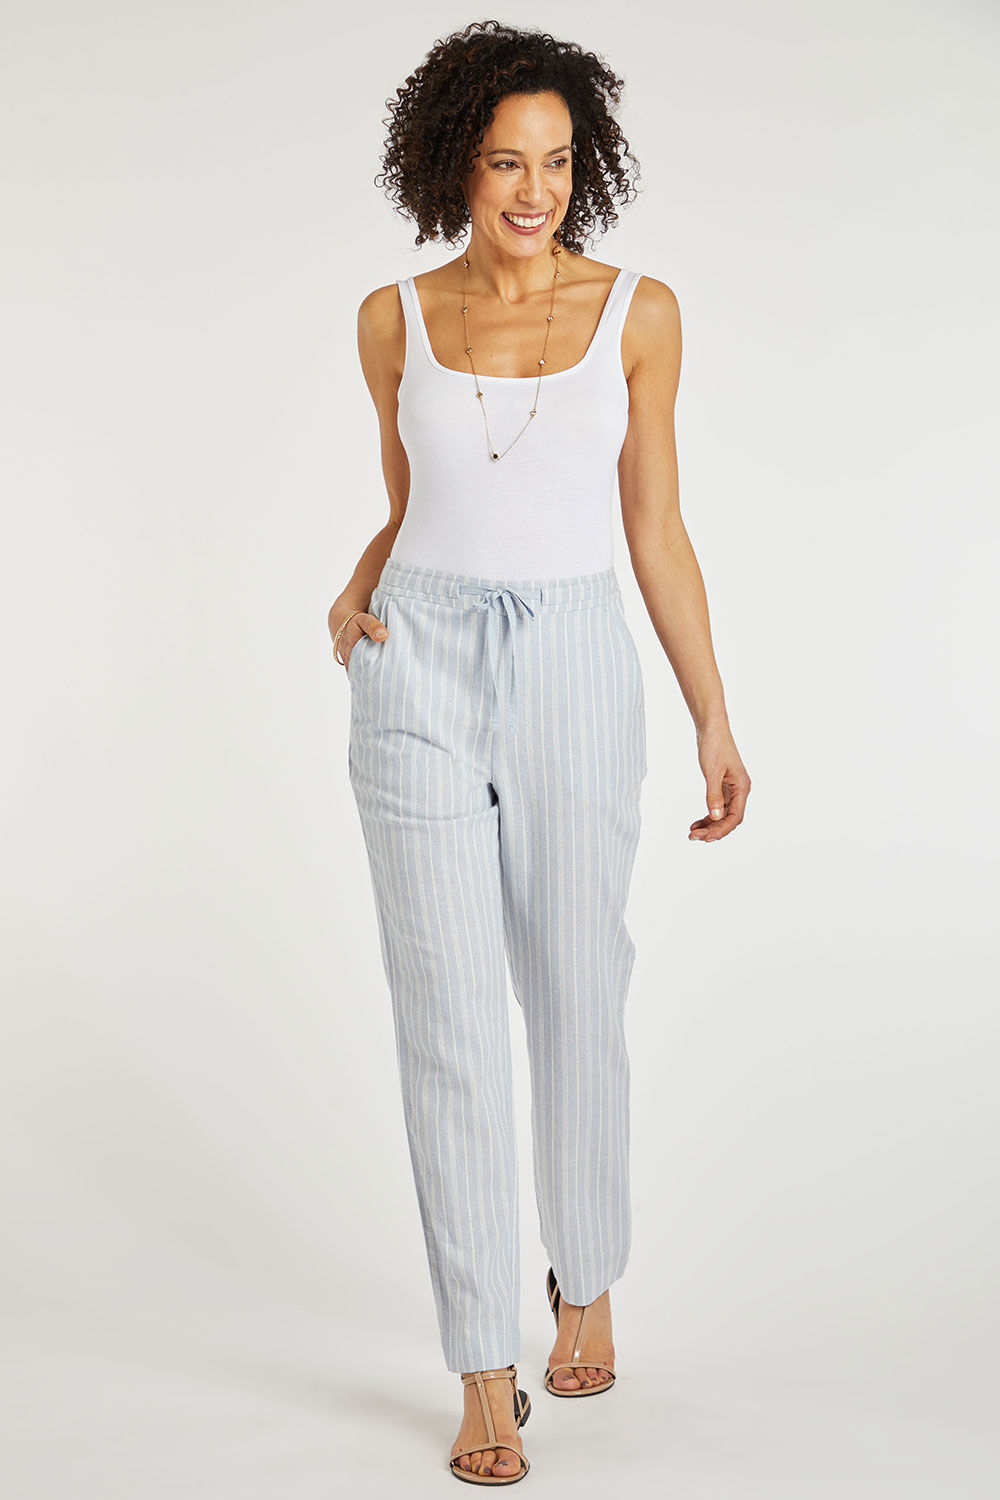 Purton Linen Blend Tapered Trousers Pants  Leggings  FatFacecom